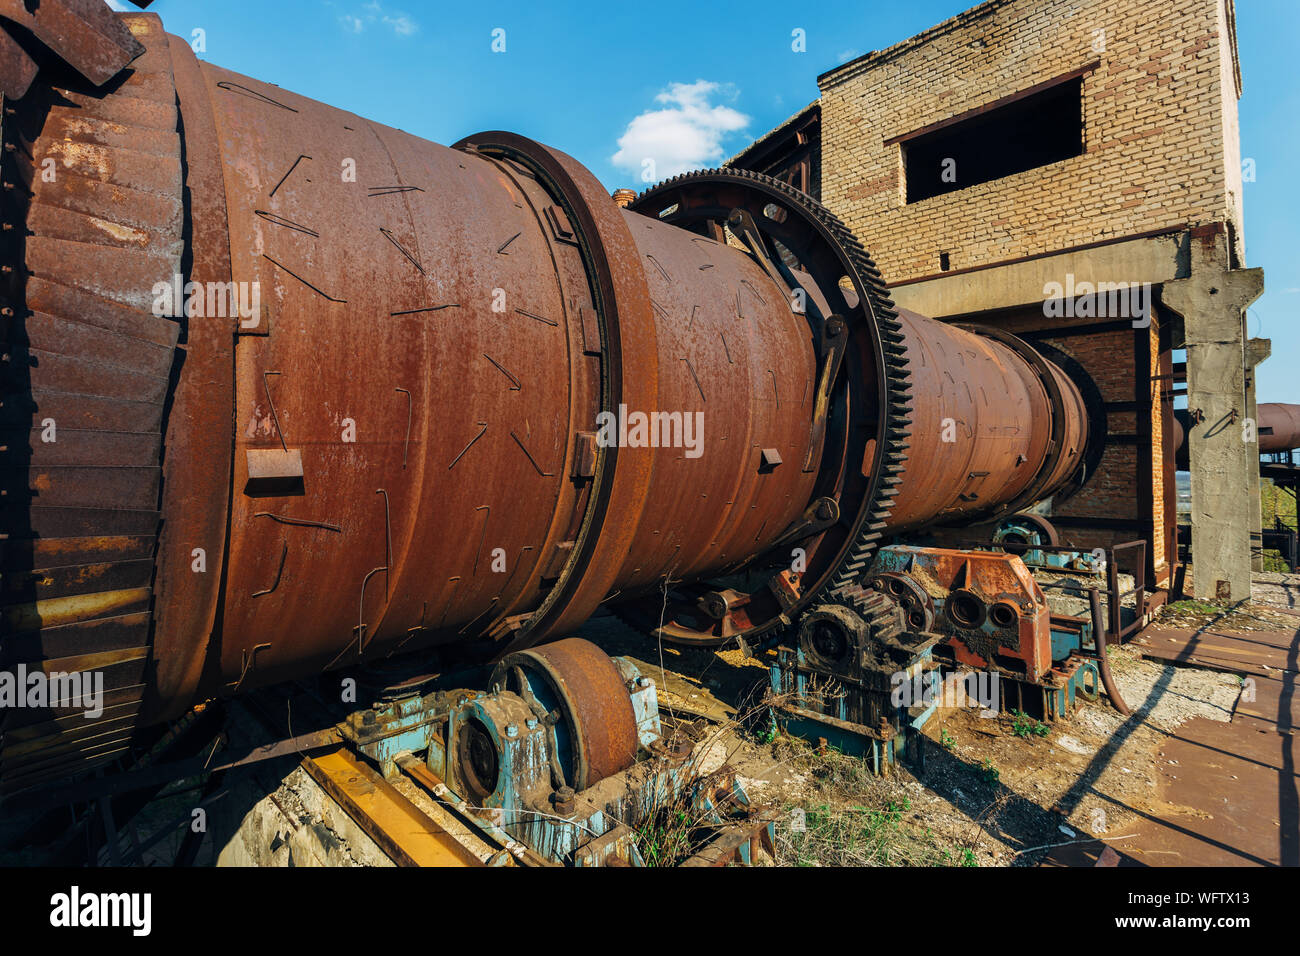 Old rusty rotating kiln in cement manufacturing plant. Stock Photo